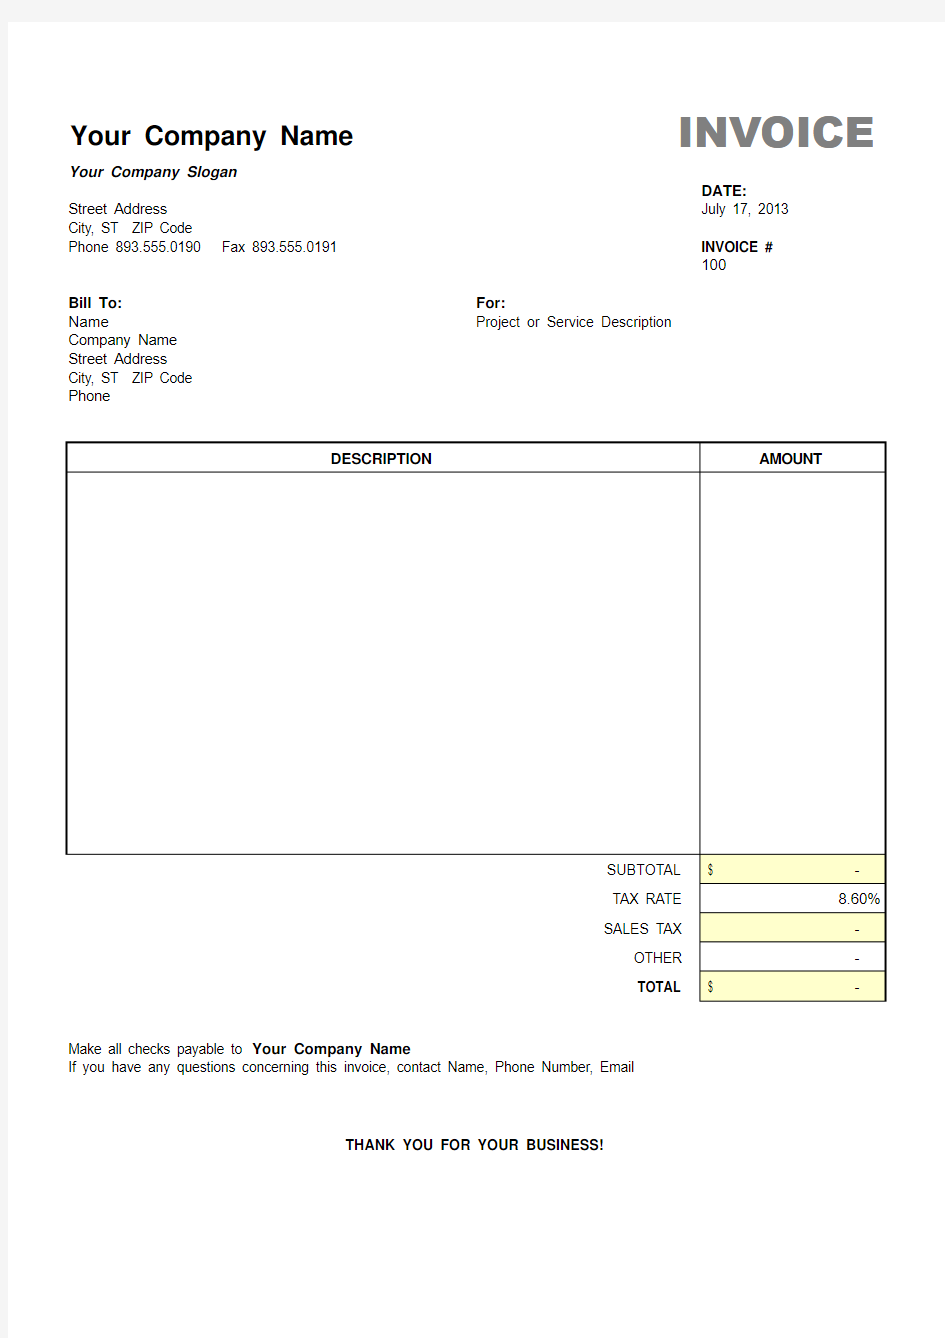 Invoice with Tax Calculation1